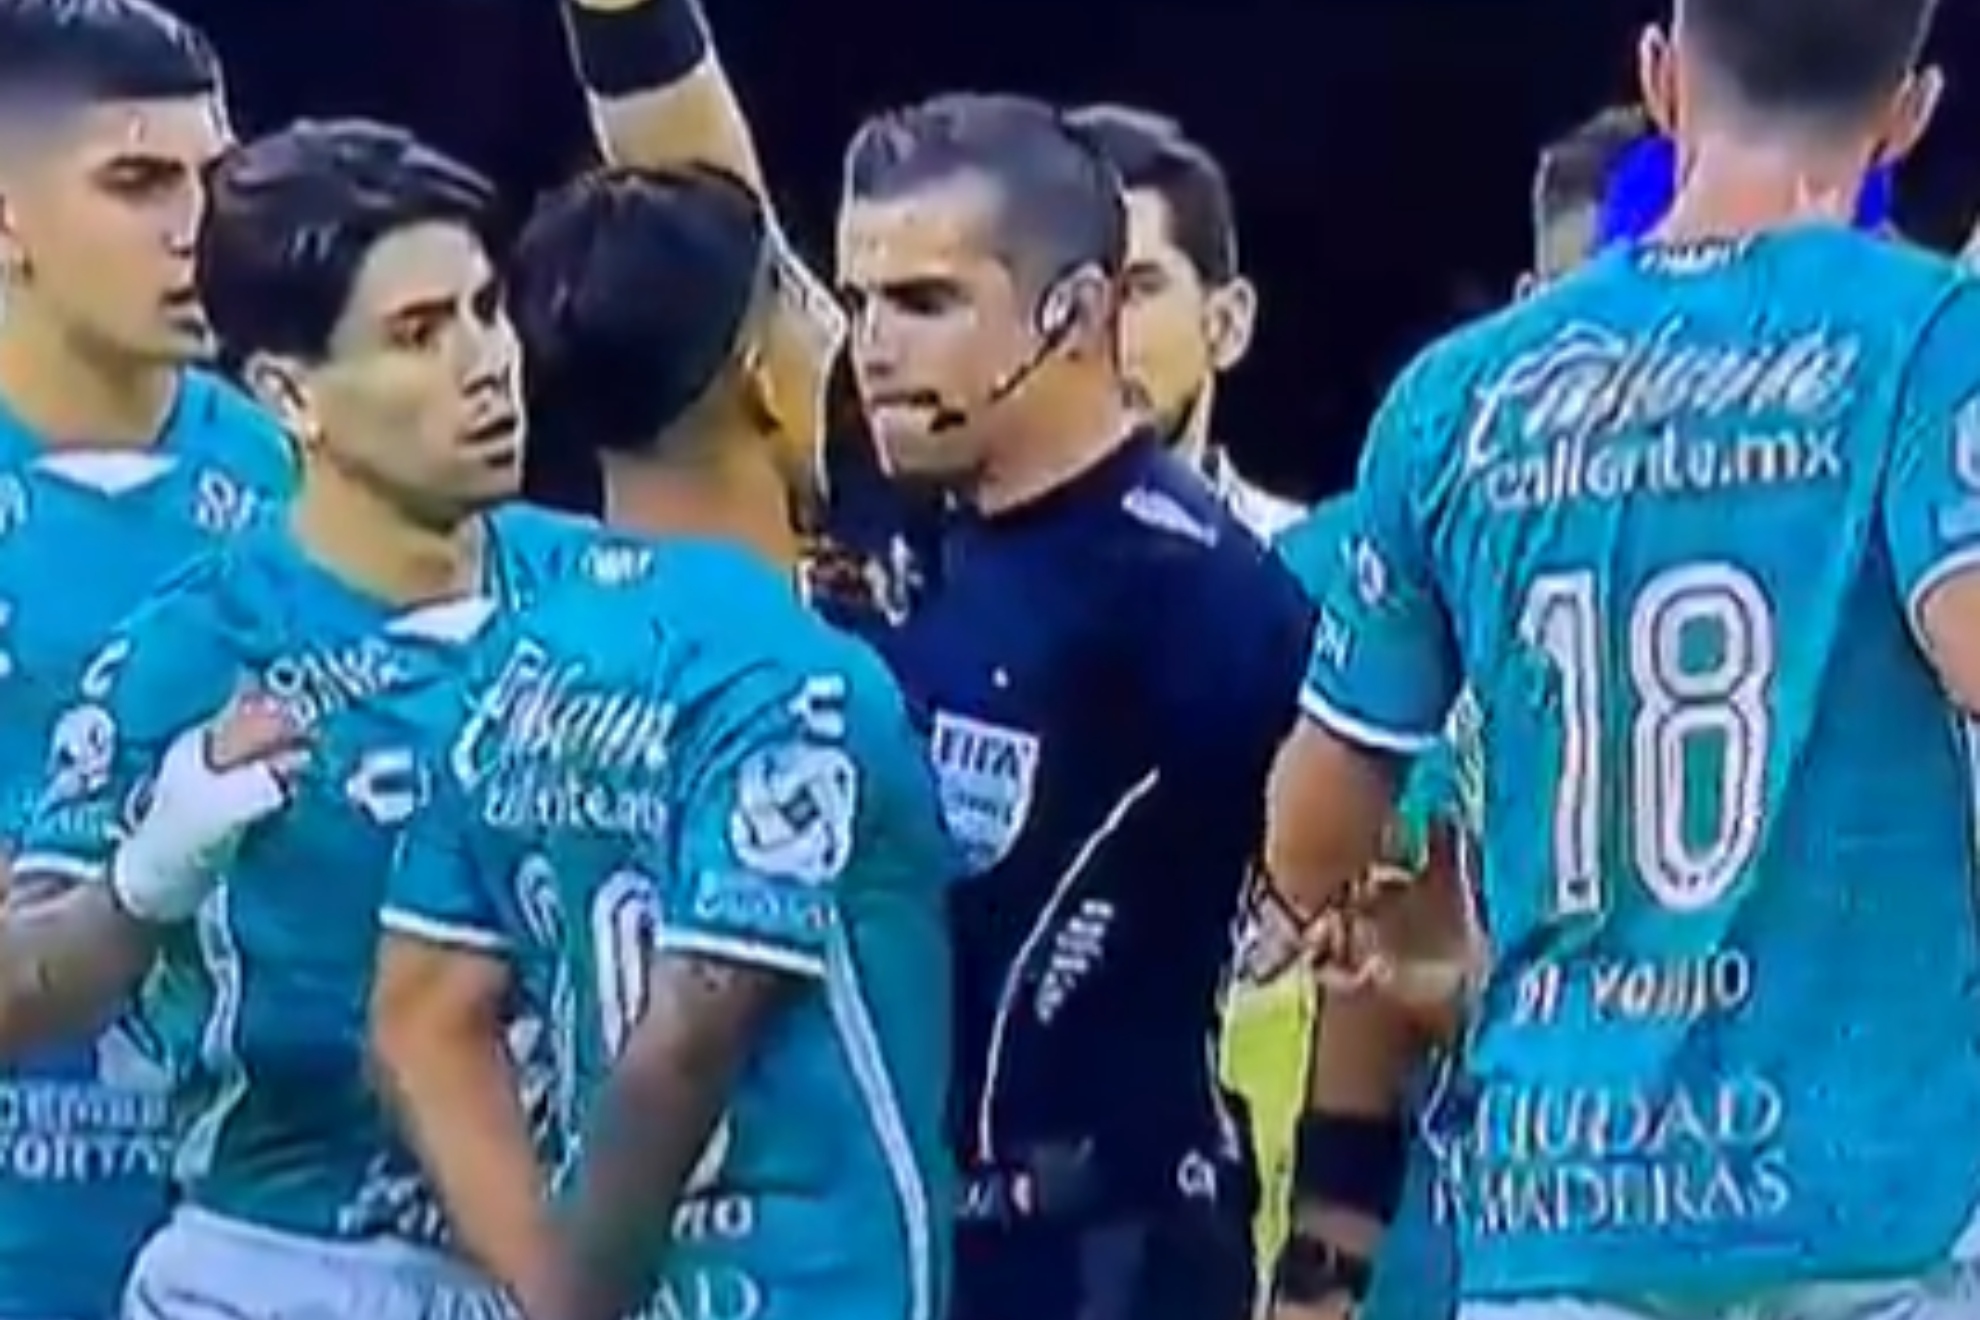 Mexican ref knees player triggering one of the most entertaining soccer games of the year